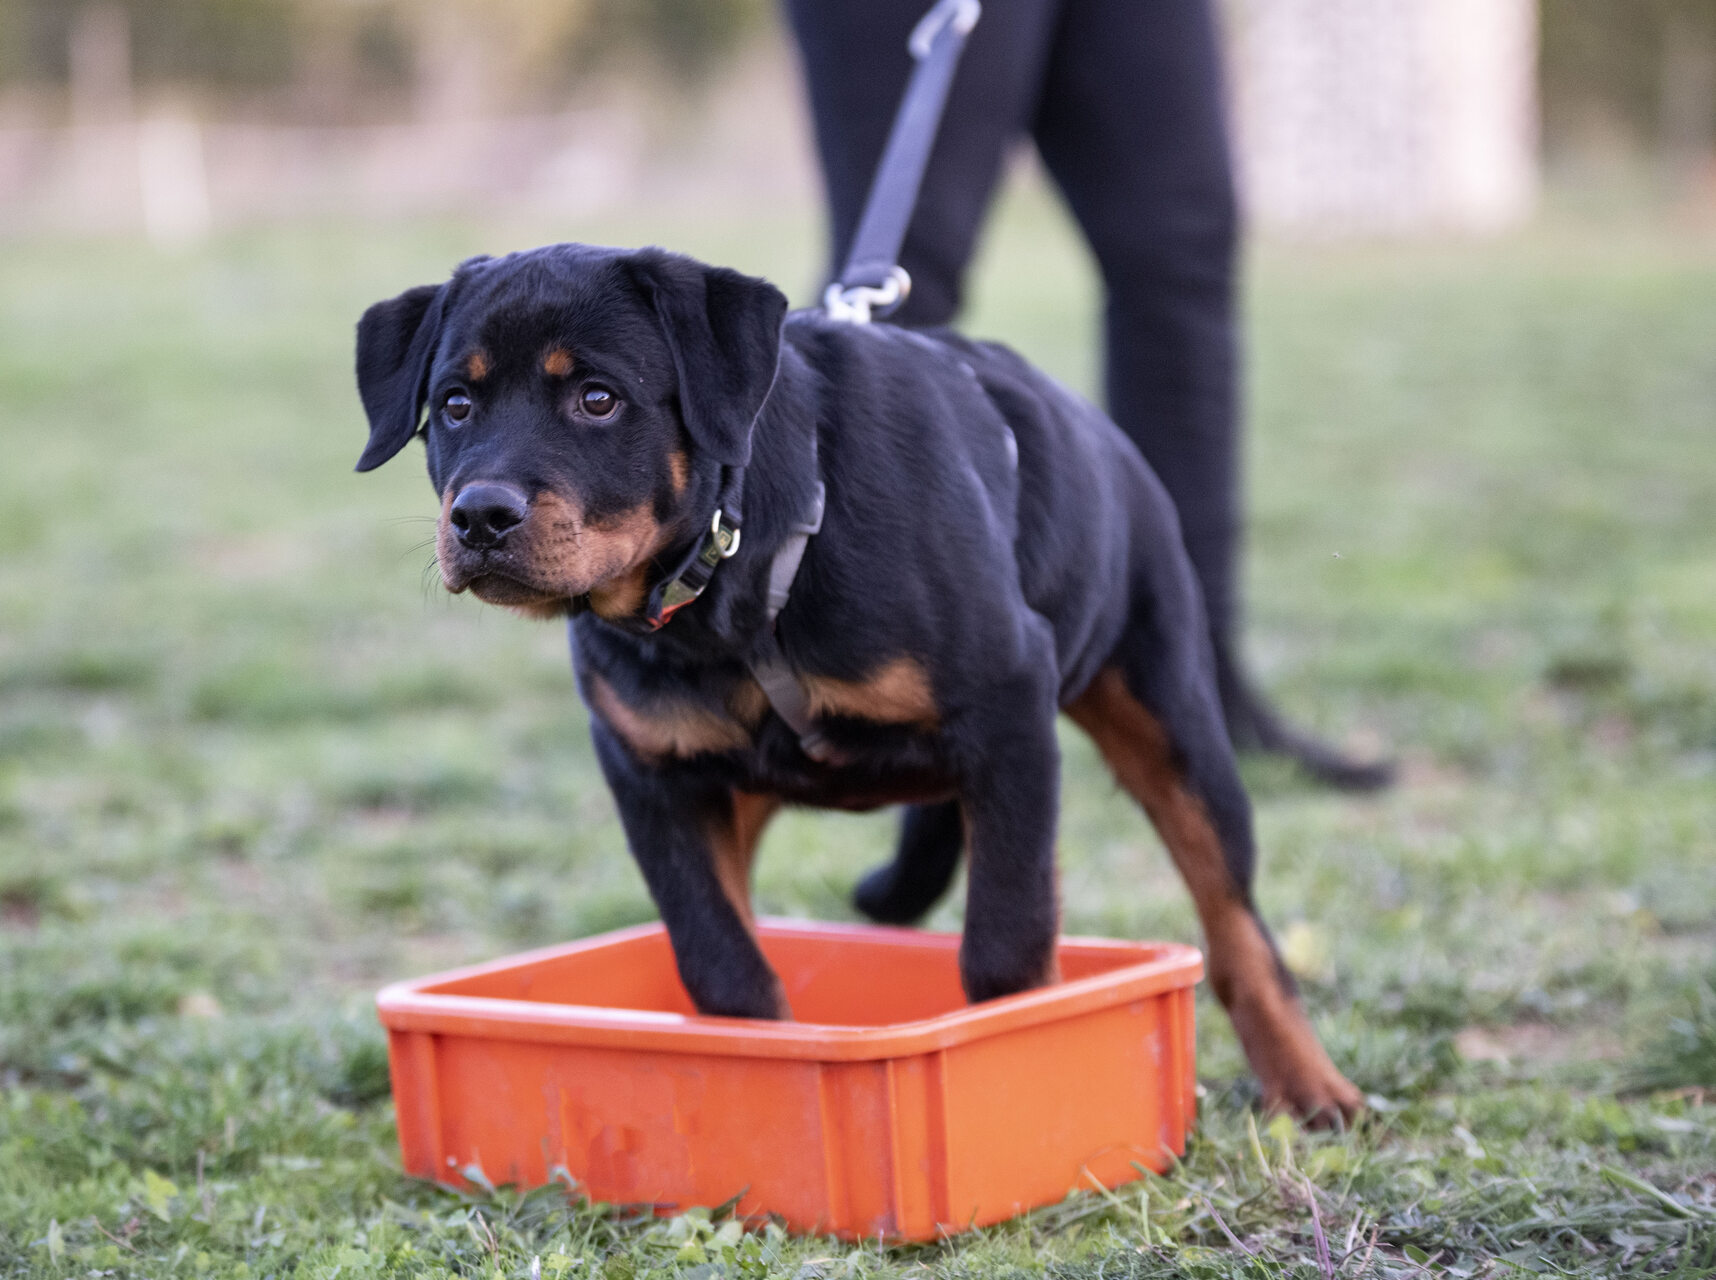 A man training a puppy to relieve themselves in a box outdoors